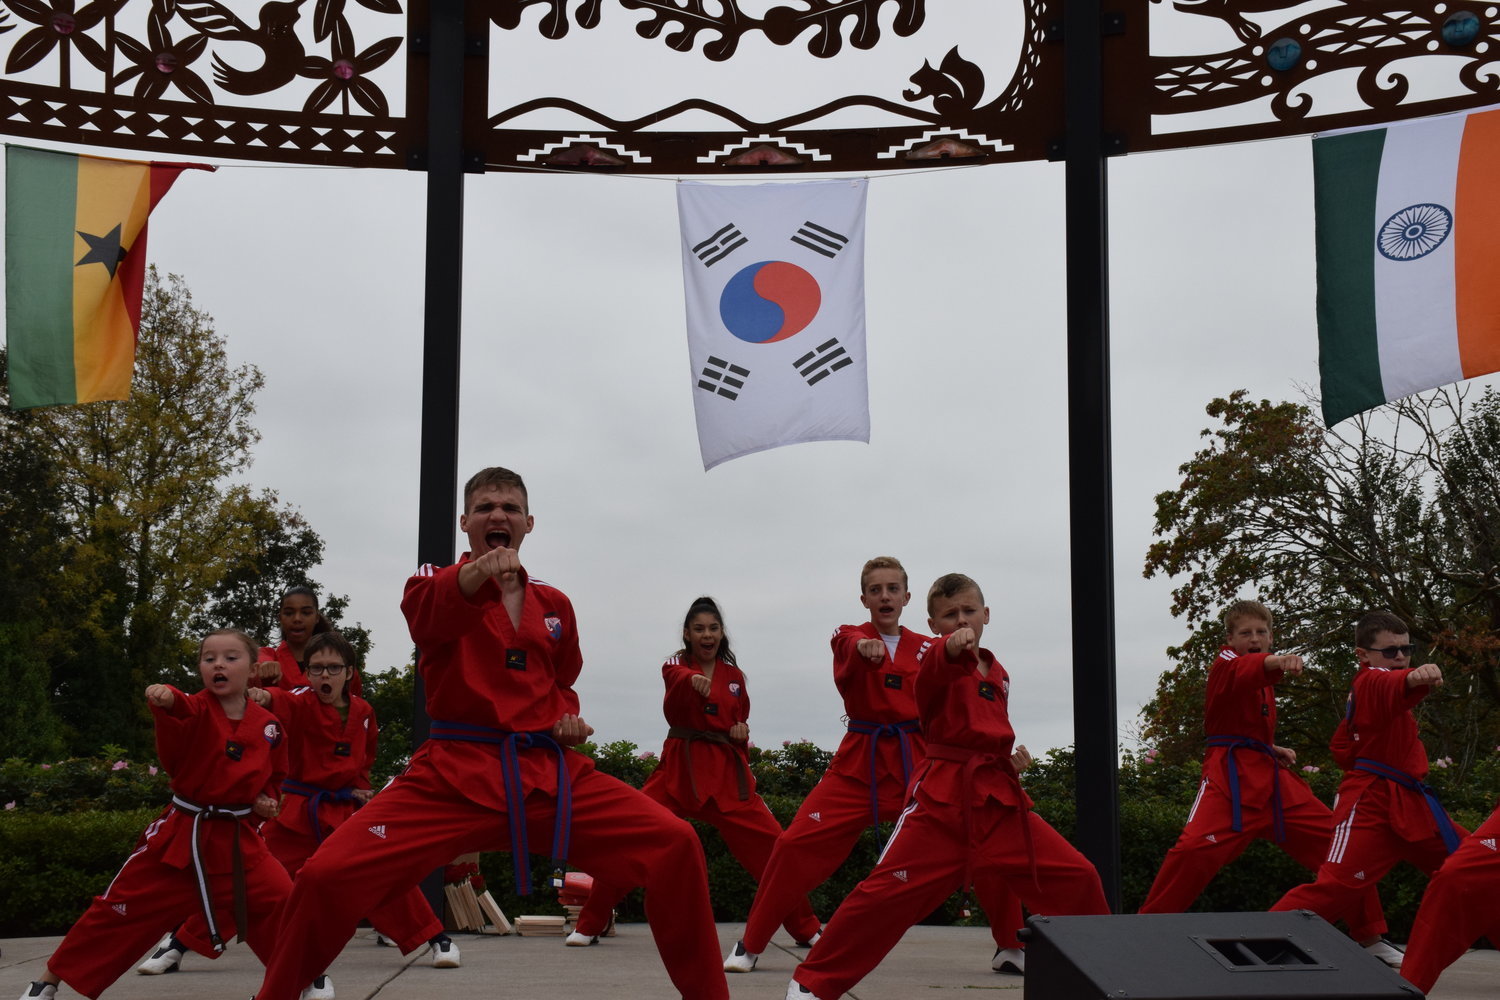 The Ridgefield Multicultural Festival, part of the Ridgefield First Saturdays series, will include performances, a basketball tournament and vendors. Taekwondo students pictured above performed at the festival in 2019.